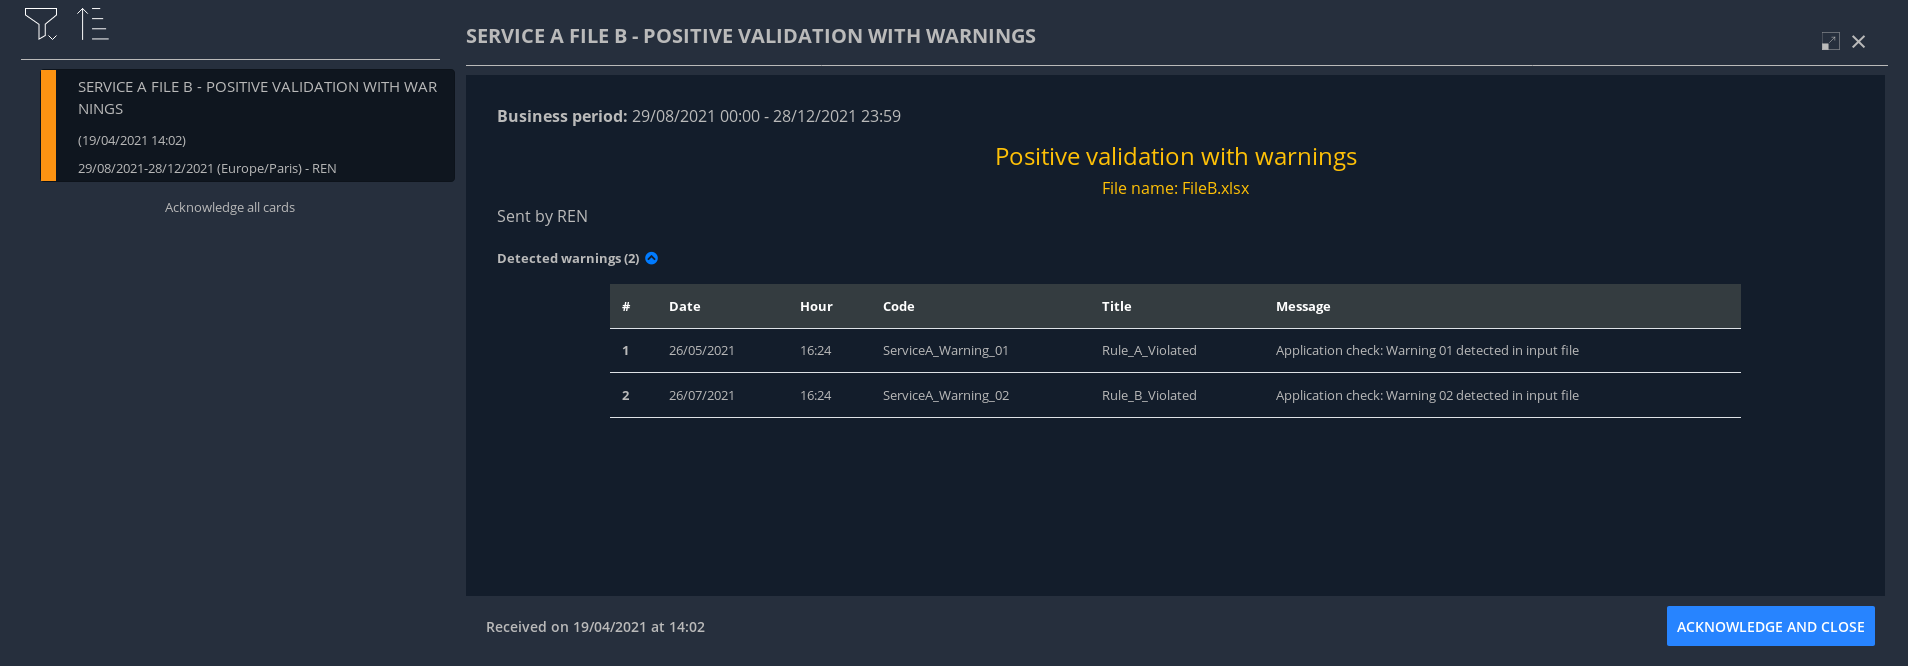 Positive validation with warnings